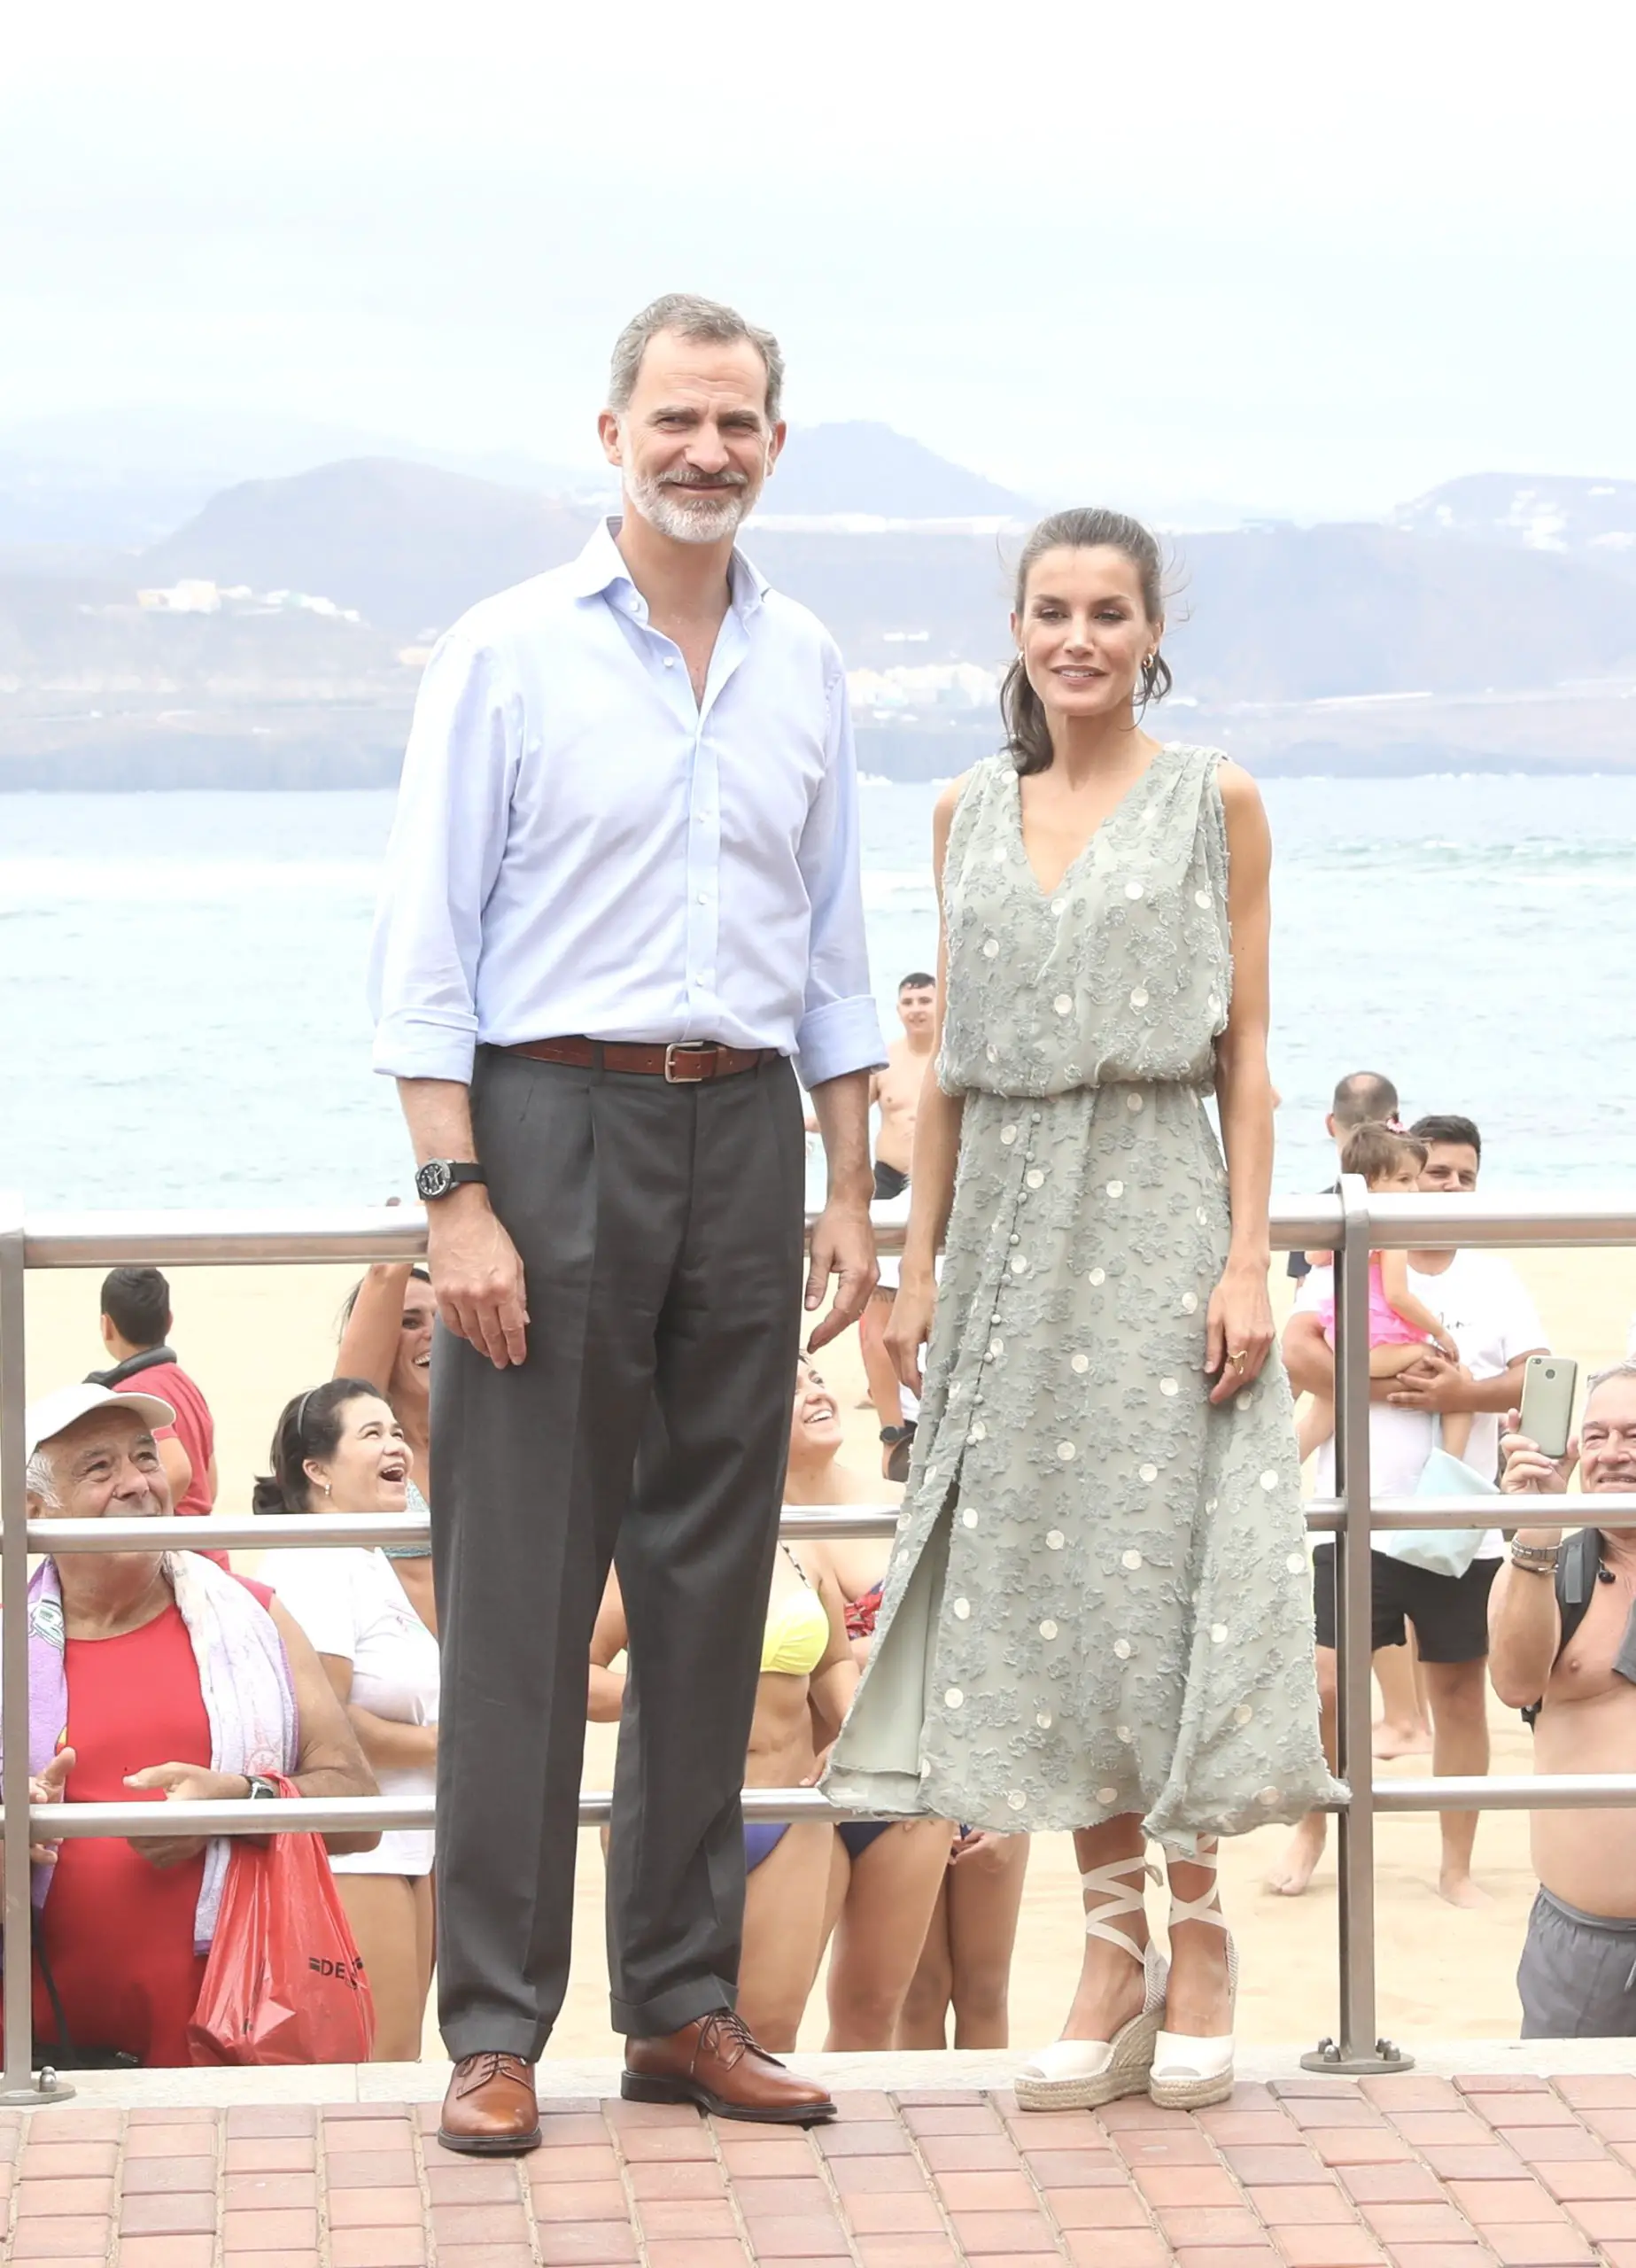 King Felipe and Queen Letizia visited Canary Islands